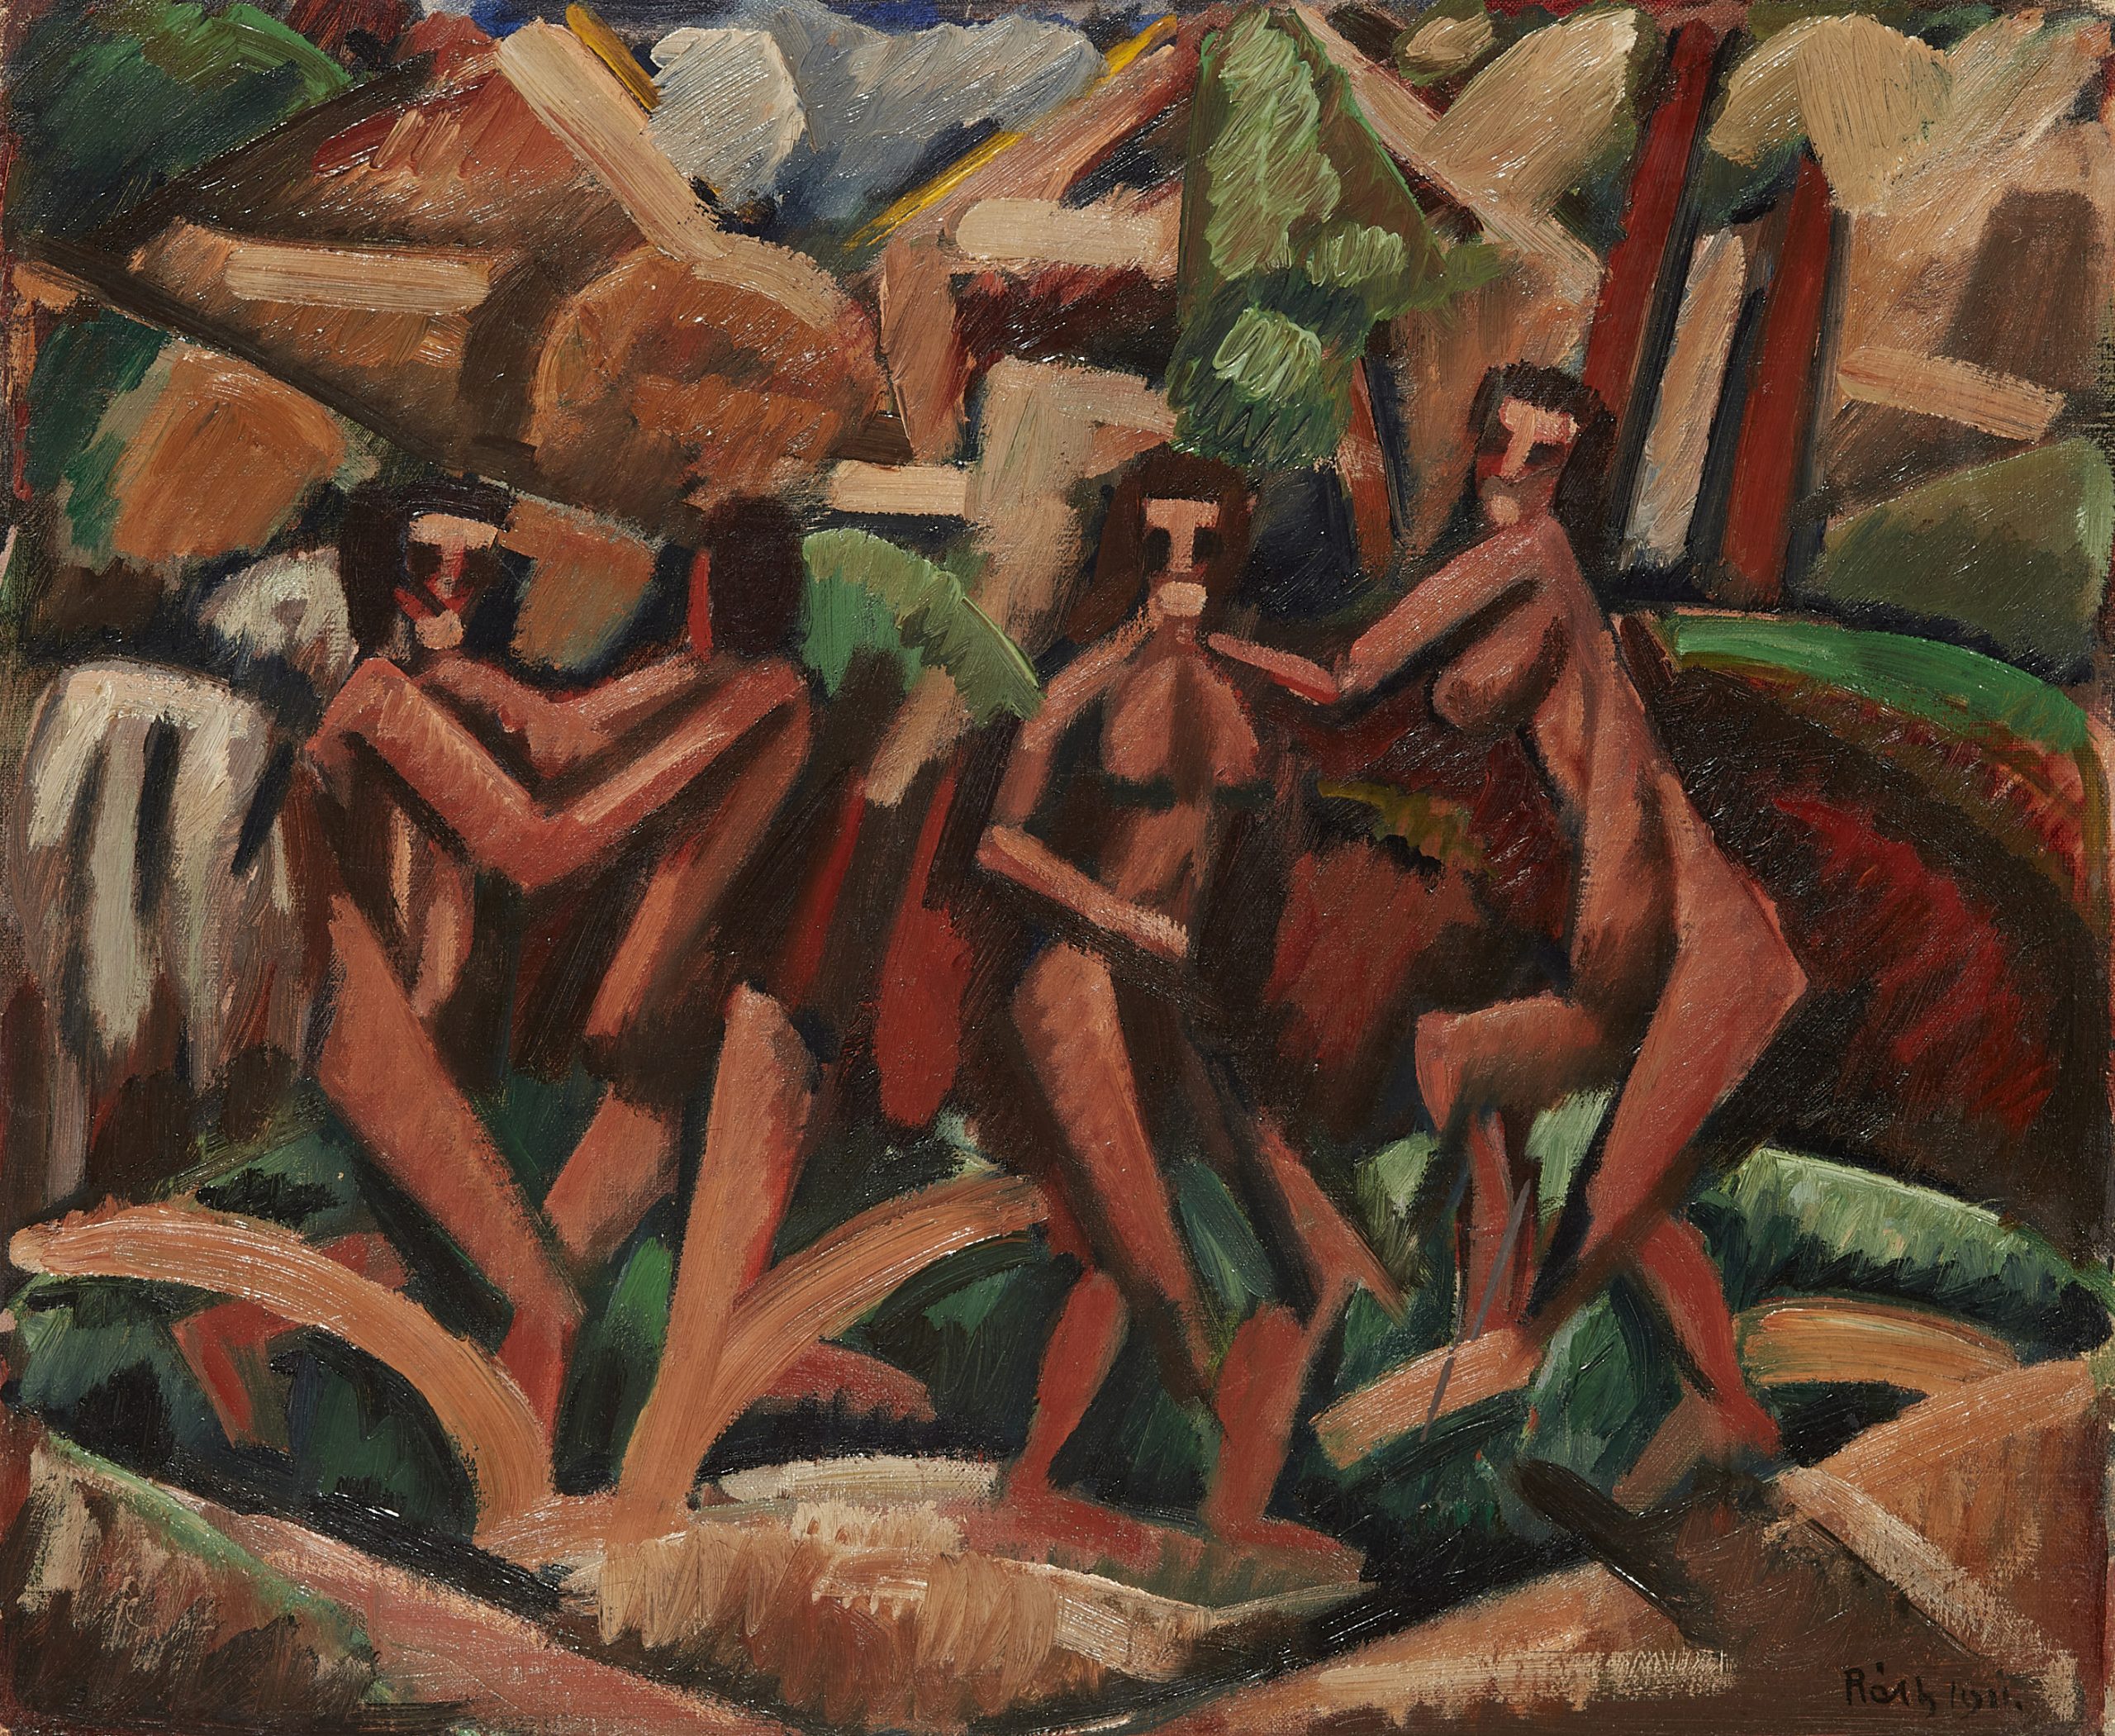 Alfred-Reth-Personnages-et-cheval-1911-oil-on-canvas-38×46-cm